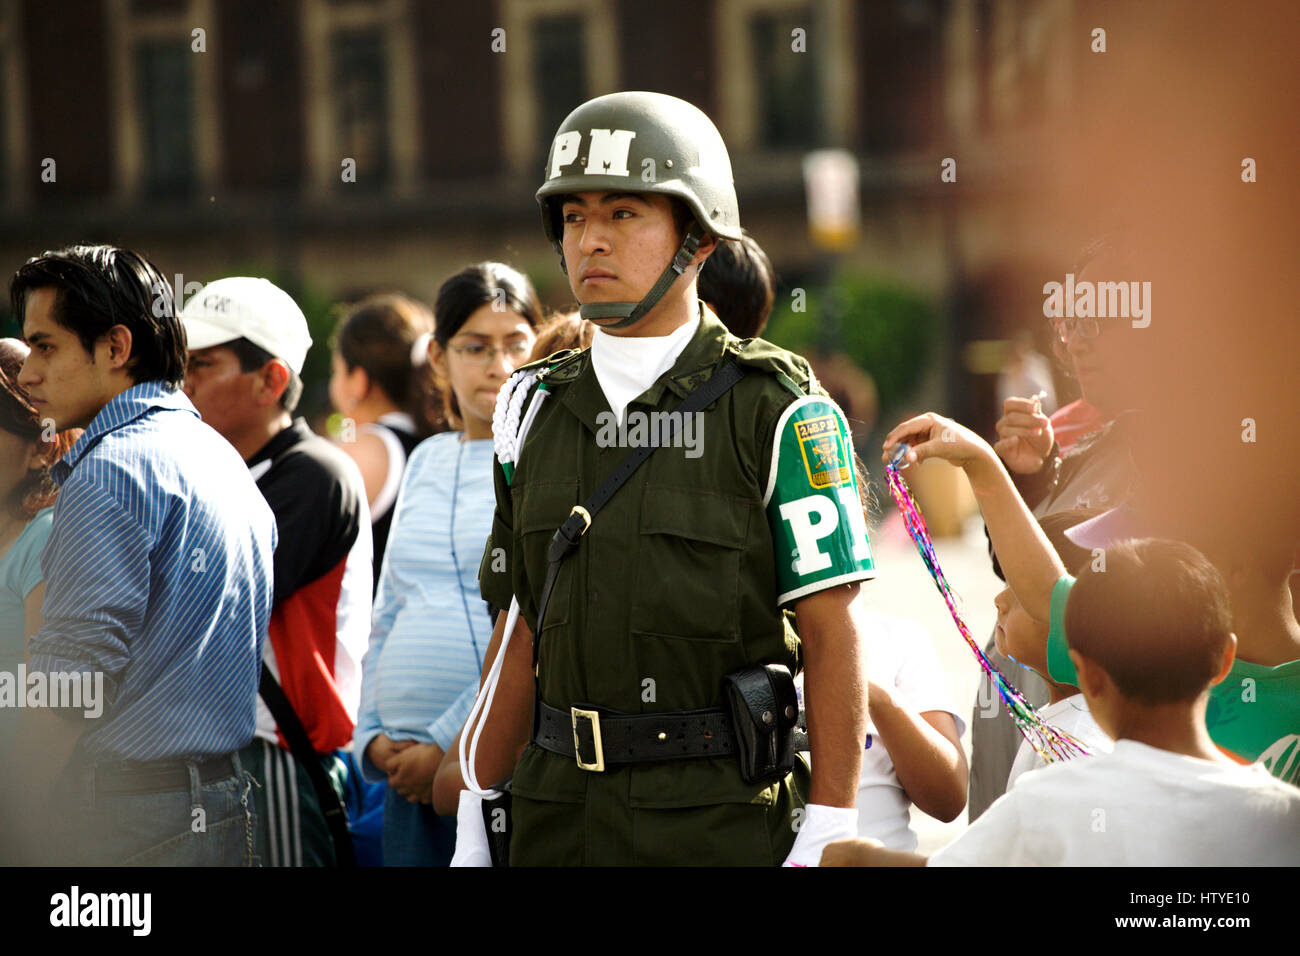 Policia Militar (Military Police) at the Zócalo square in Mexico City. Stock Photo